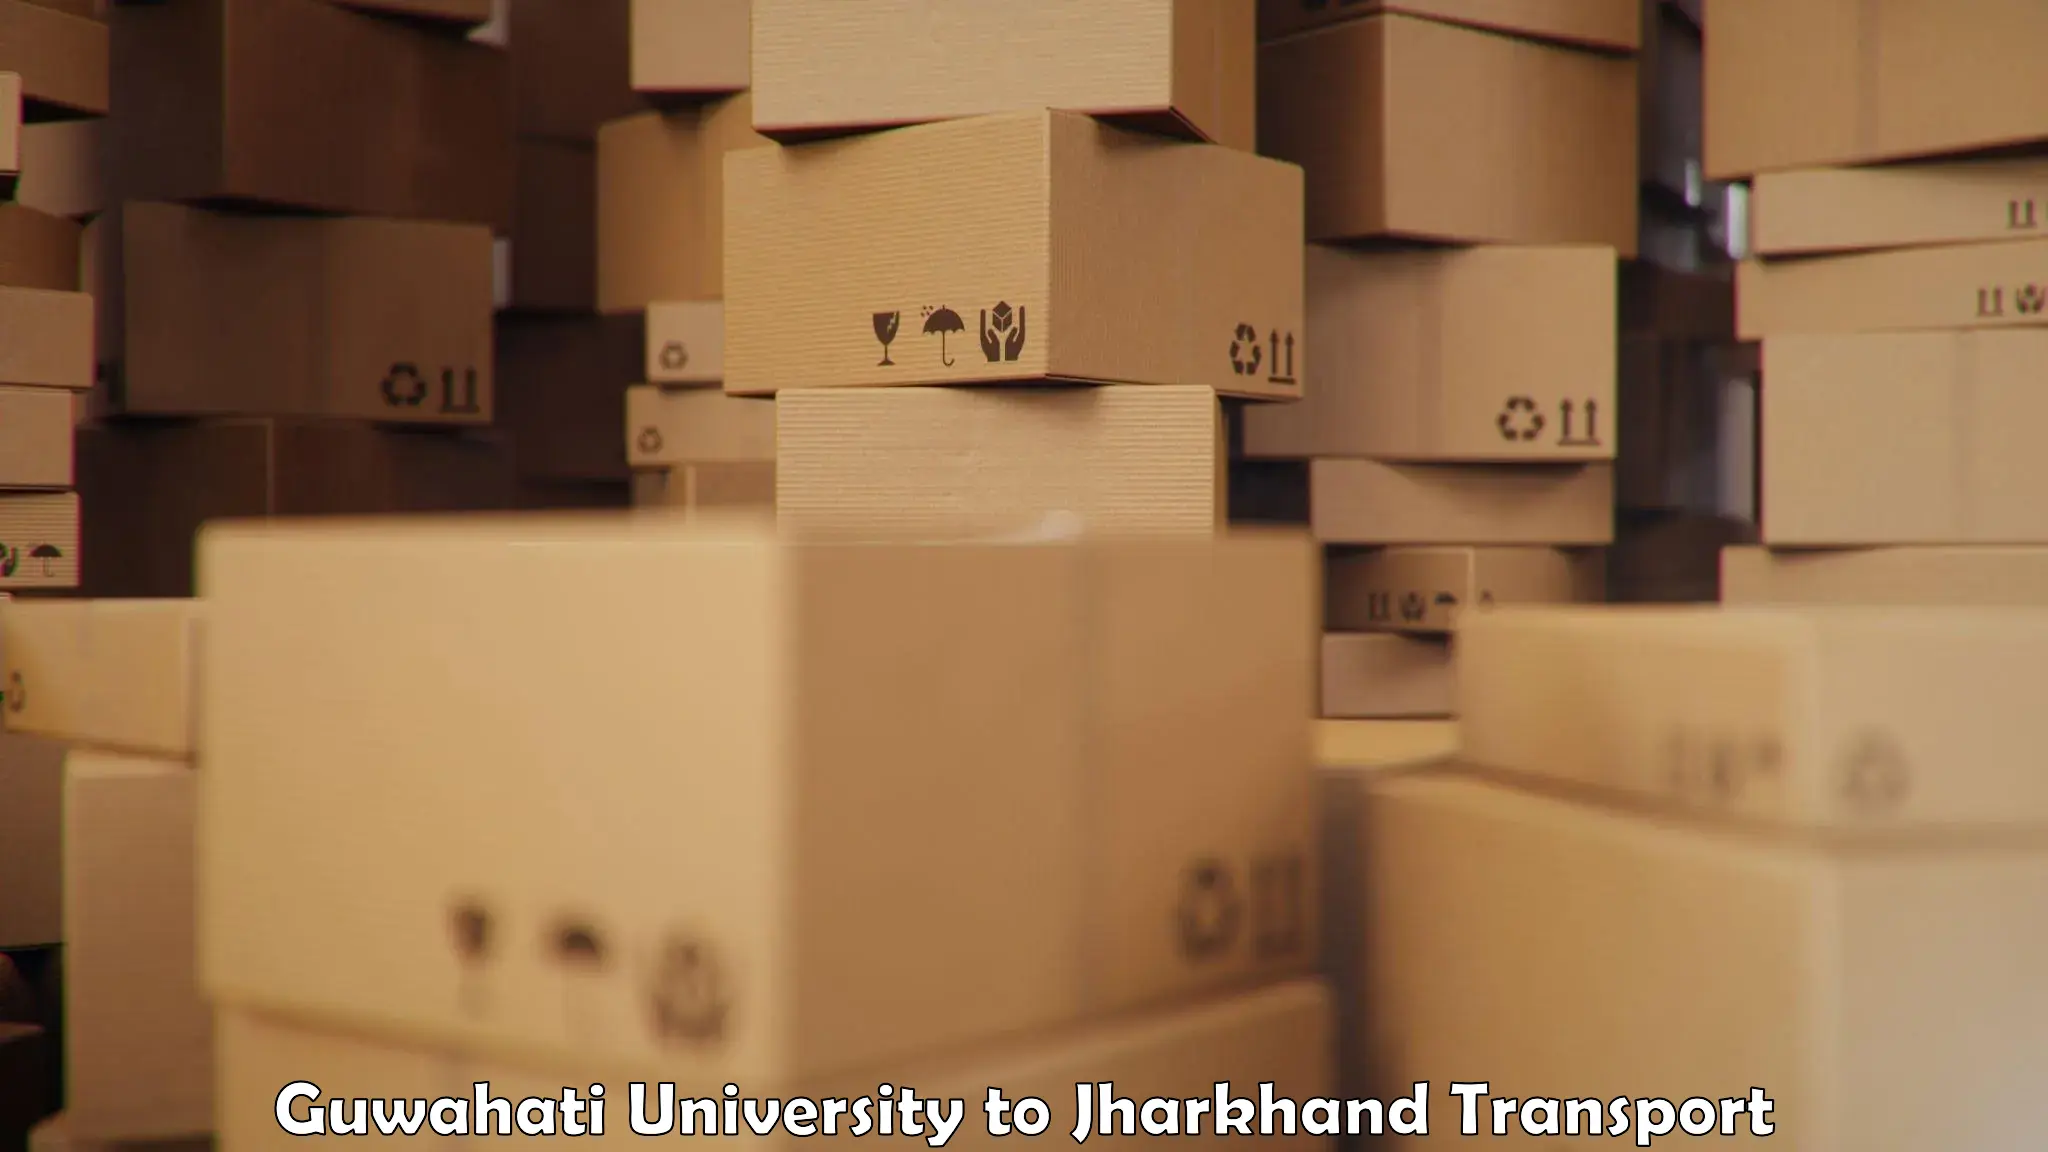 Delivery service Guwahati University to Dhanbad